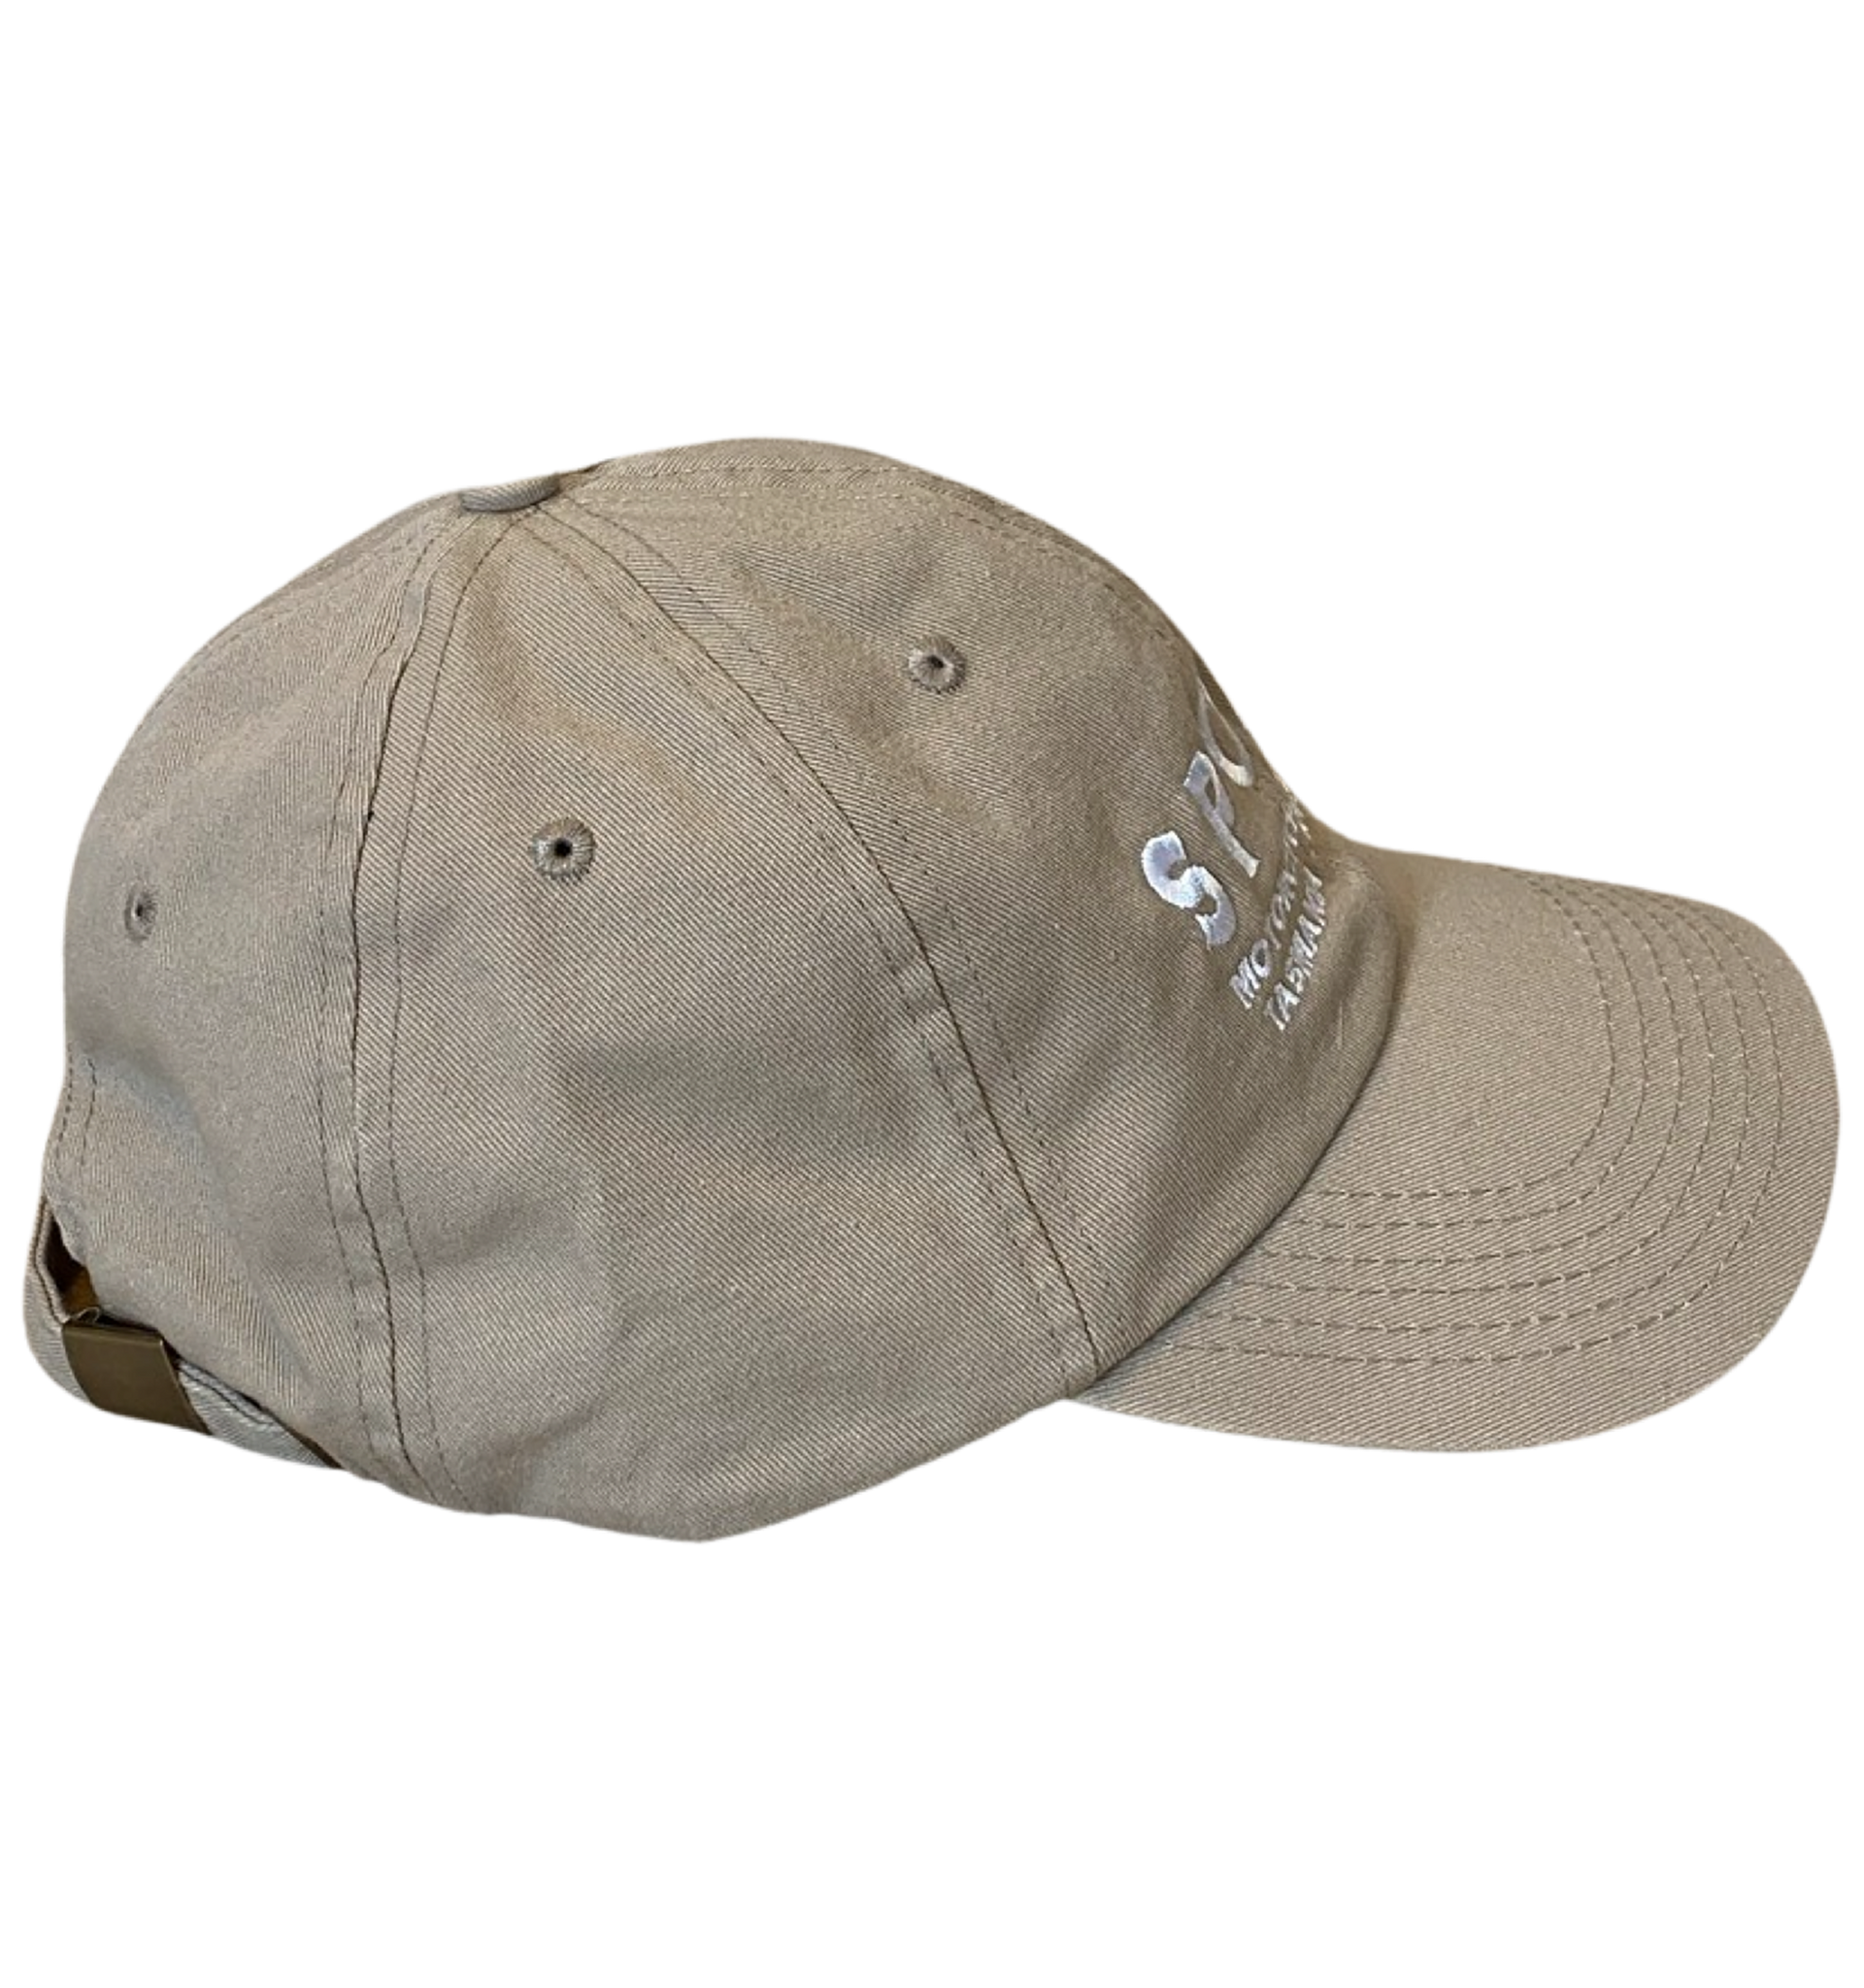 Spoke Clay Embroidered Washed Chino Twill Cap - Location